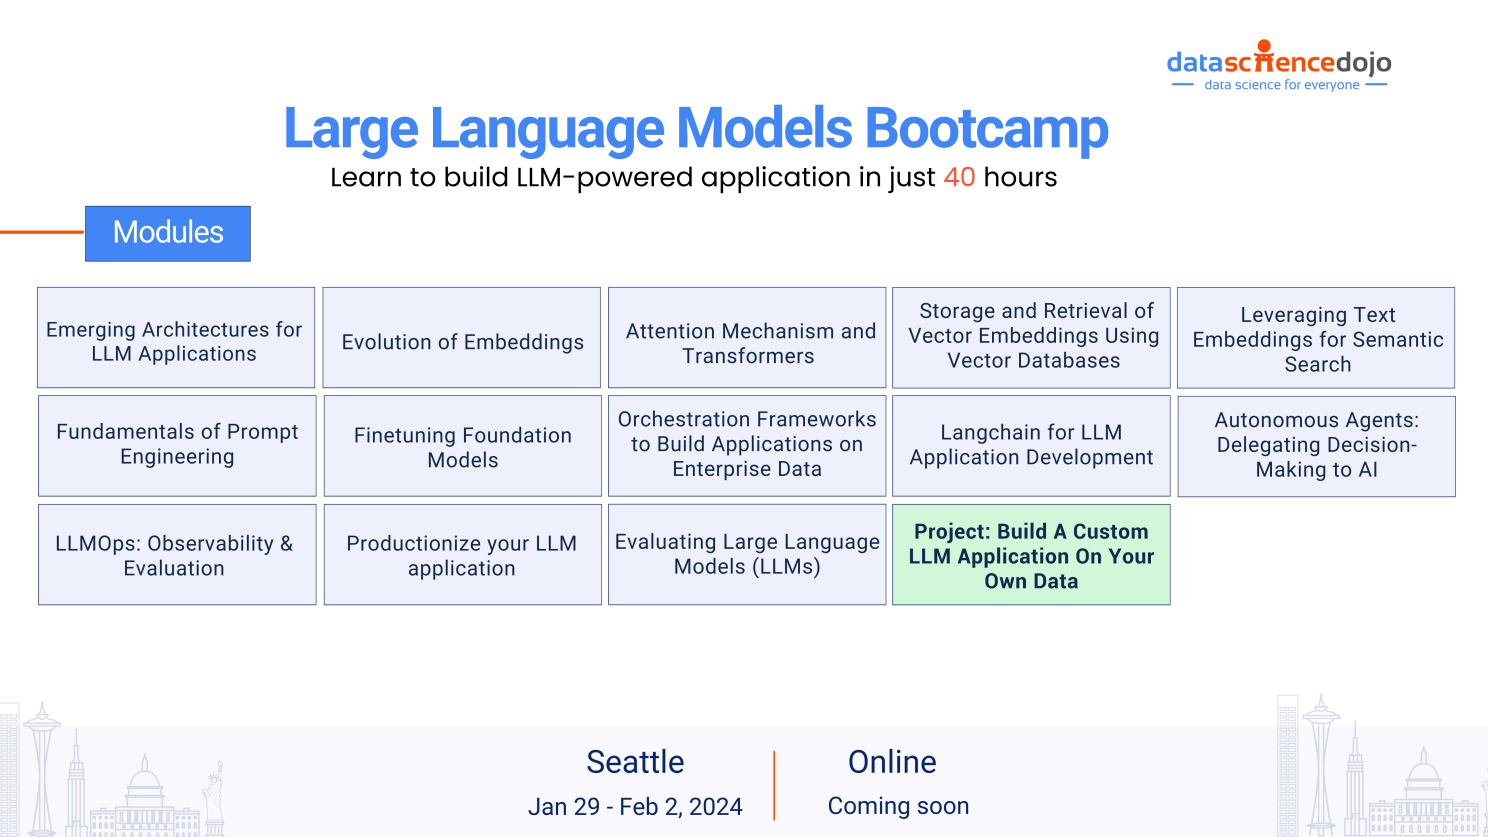 An infographic showing the curriculum for the LLM Bootcamp offered by Data Science Dojo